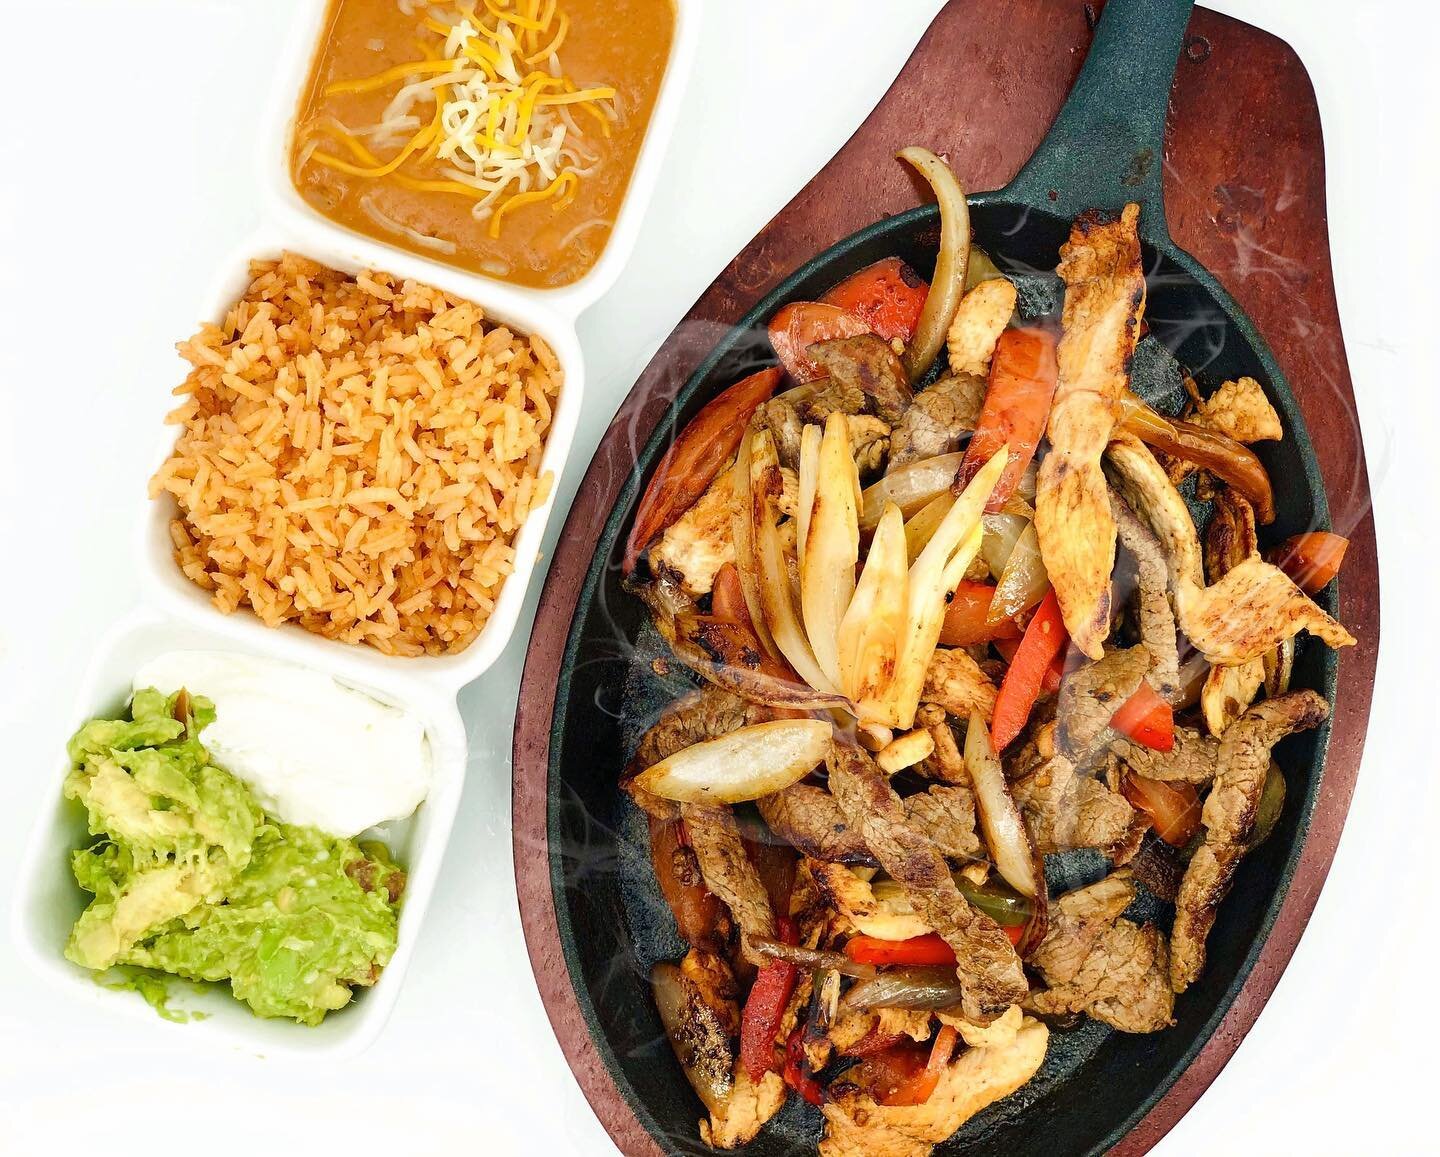 OUR NEW DUO FAJITA PLATE IS NOW HERE!!
&bull;Choose Two Meats!
&bull;Comes With Bell Peppers, Onions, Tomatoes!
&bull;Sides Include Rice, Beans, Guacamole, And Sour Cream!!
&bull;&bull;&bull;ONLY 12.99!!!
Come Check Out Our New Menus!
New Items For B